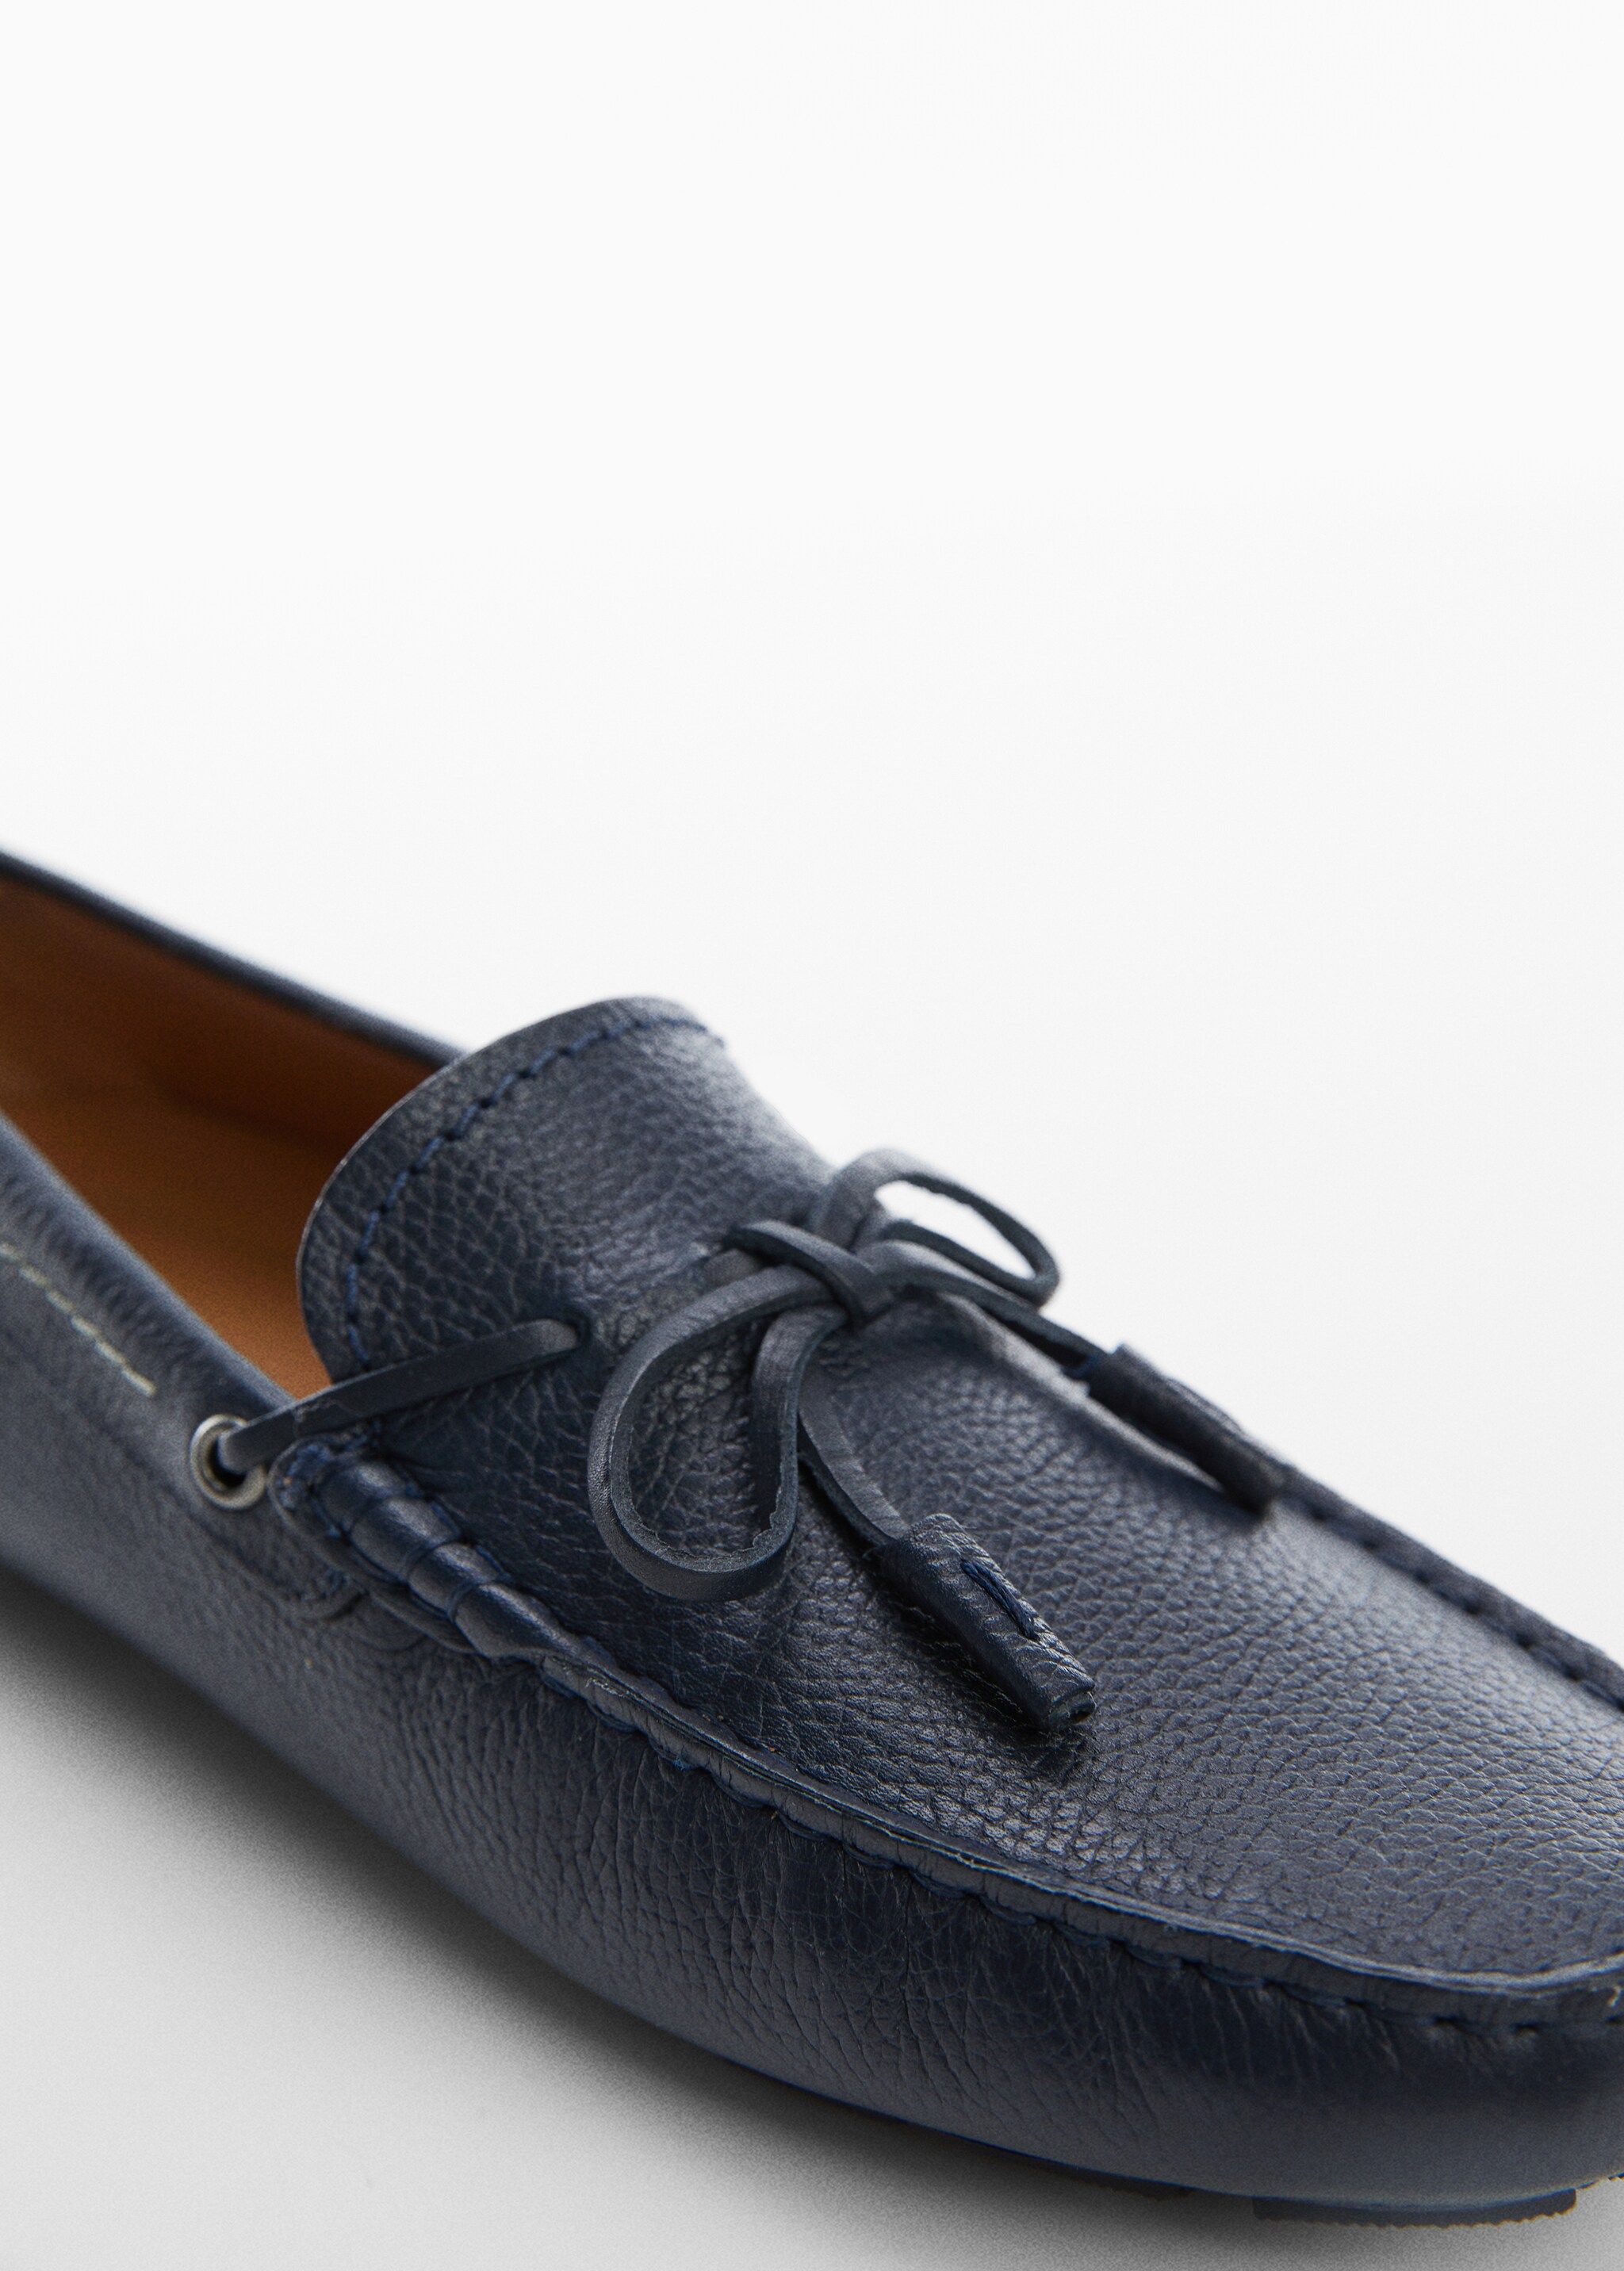 Leather loafers with tassels - Details of the article 1